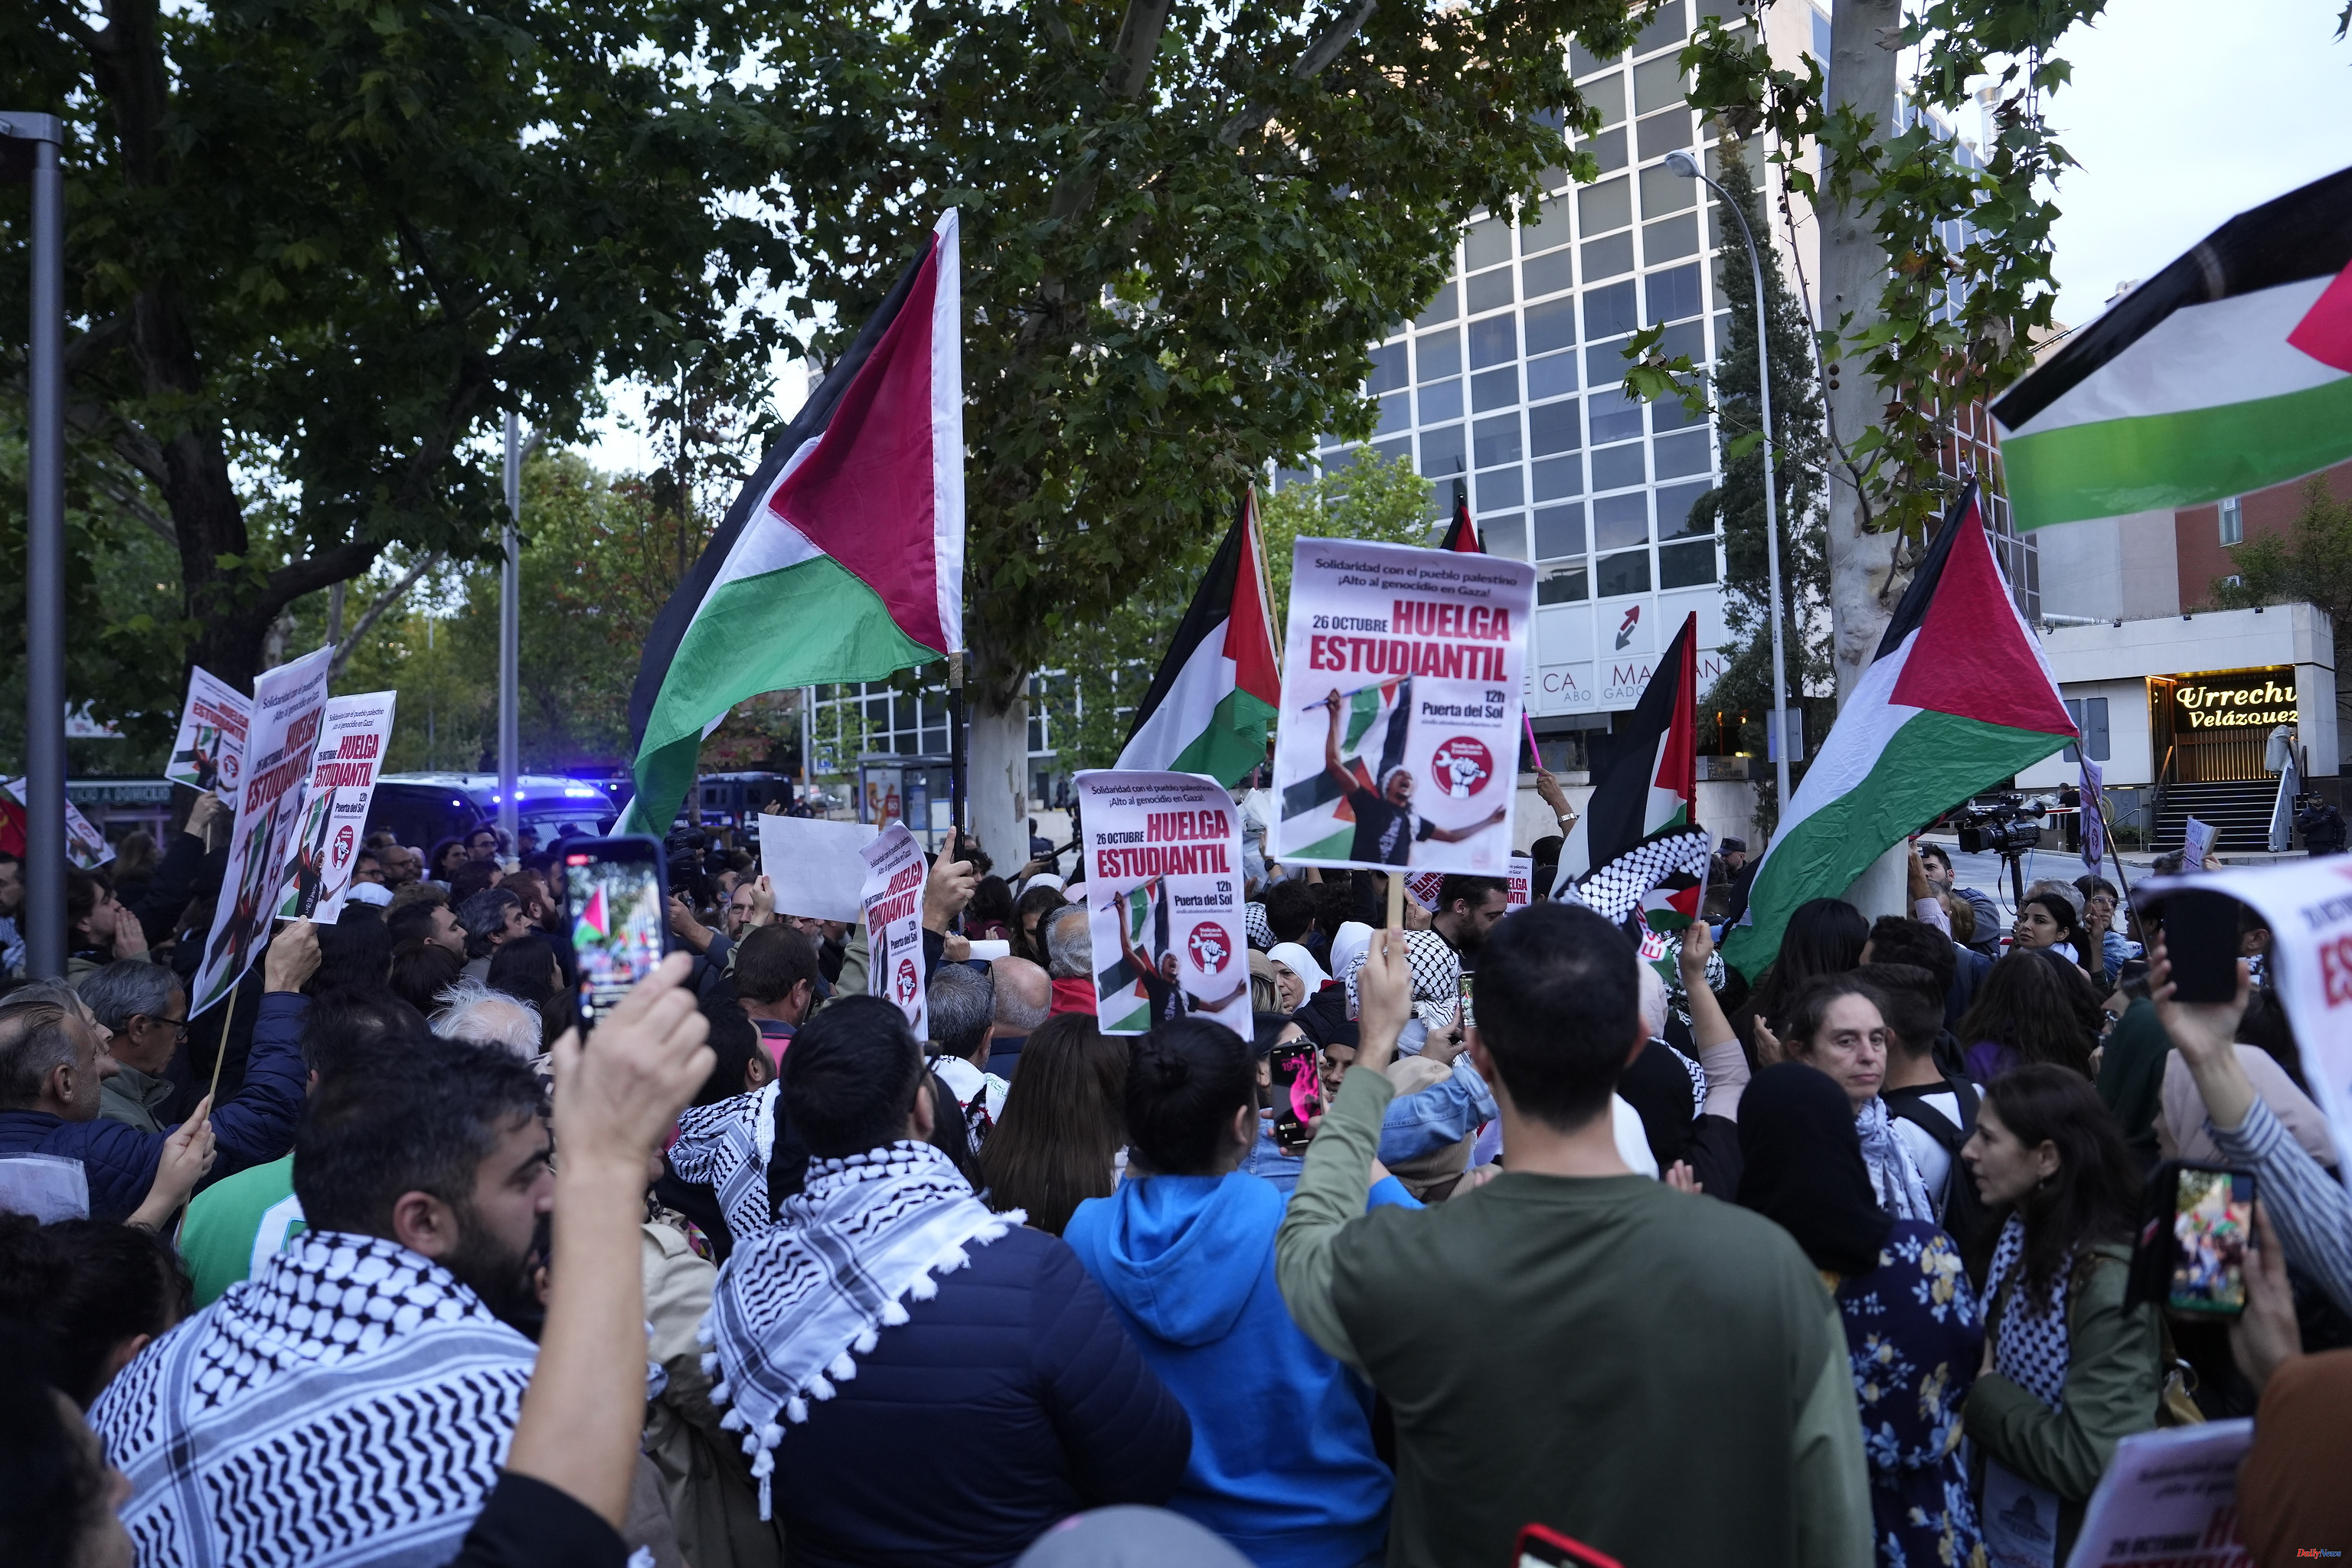 Madrid Hundreds of people protest in front of the Israeli Embassy in favor of Palestine